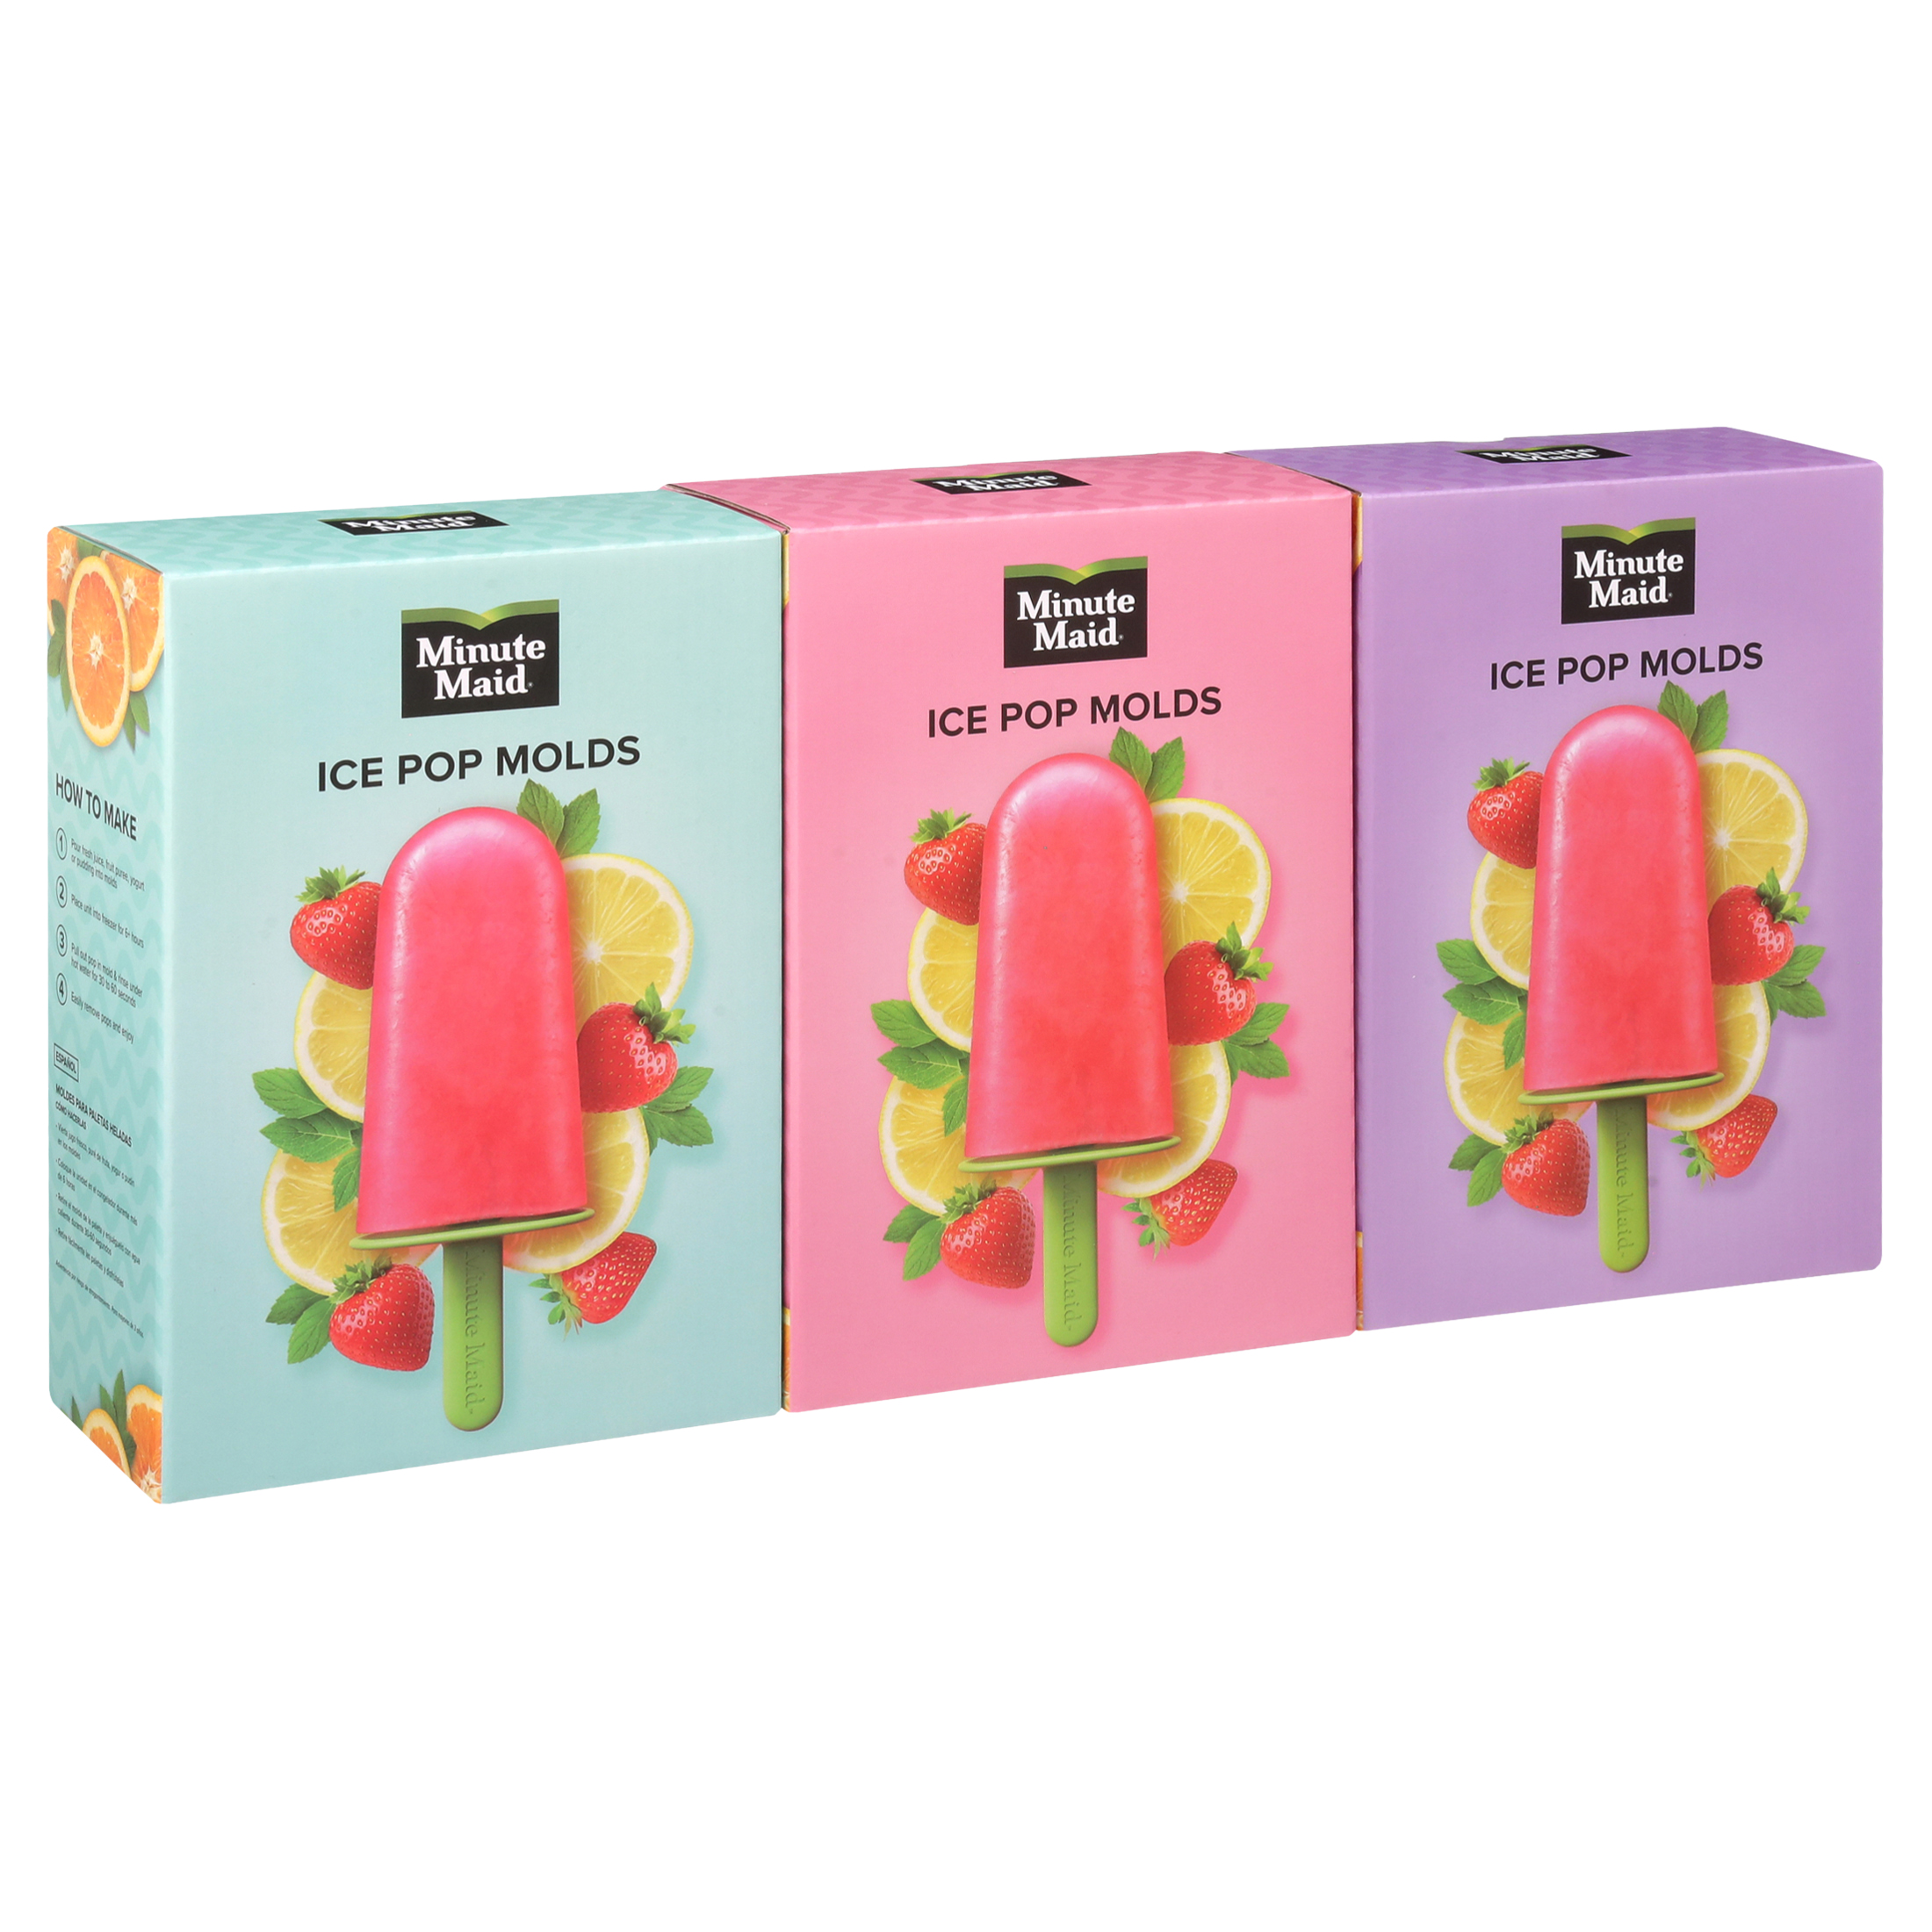 Minute Maid Set of 3 Ice Pop Molds - 1 Red, 1 Teal, 1 Purple - image 2 of 8